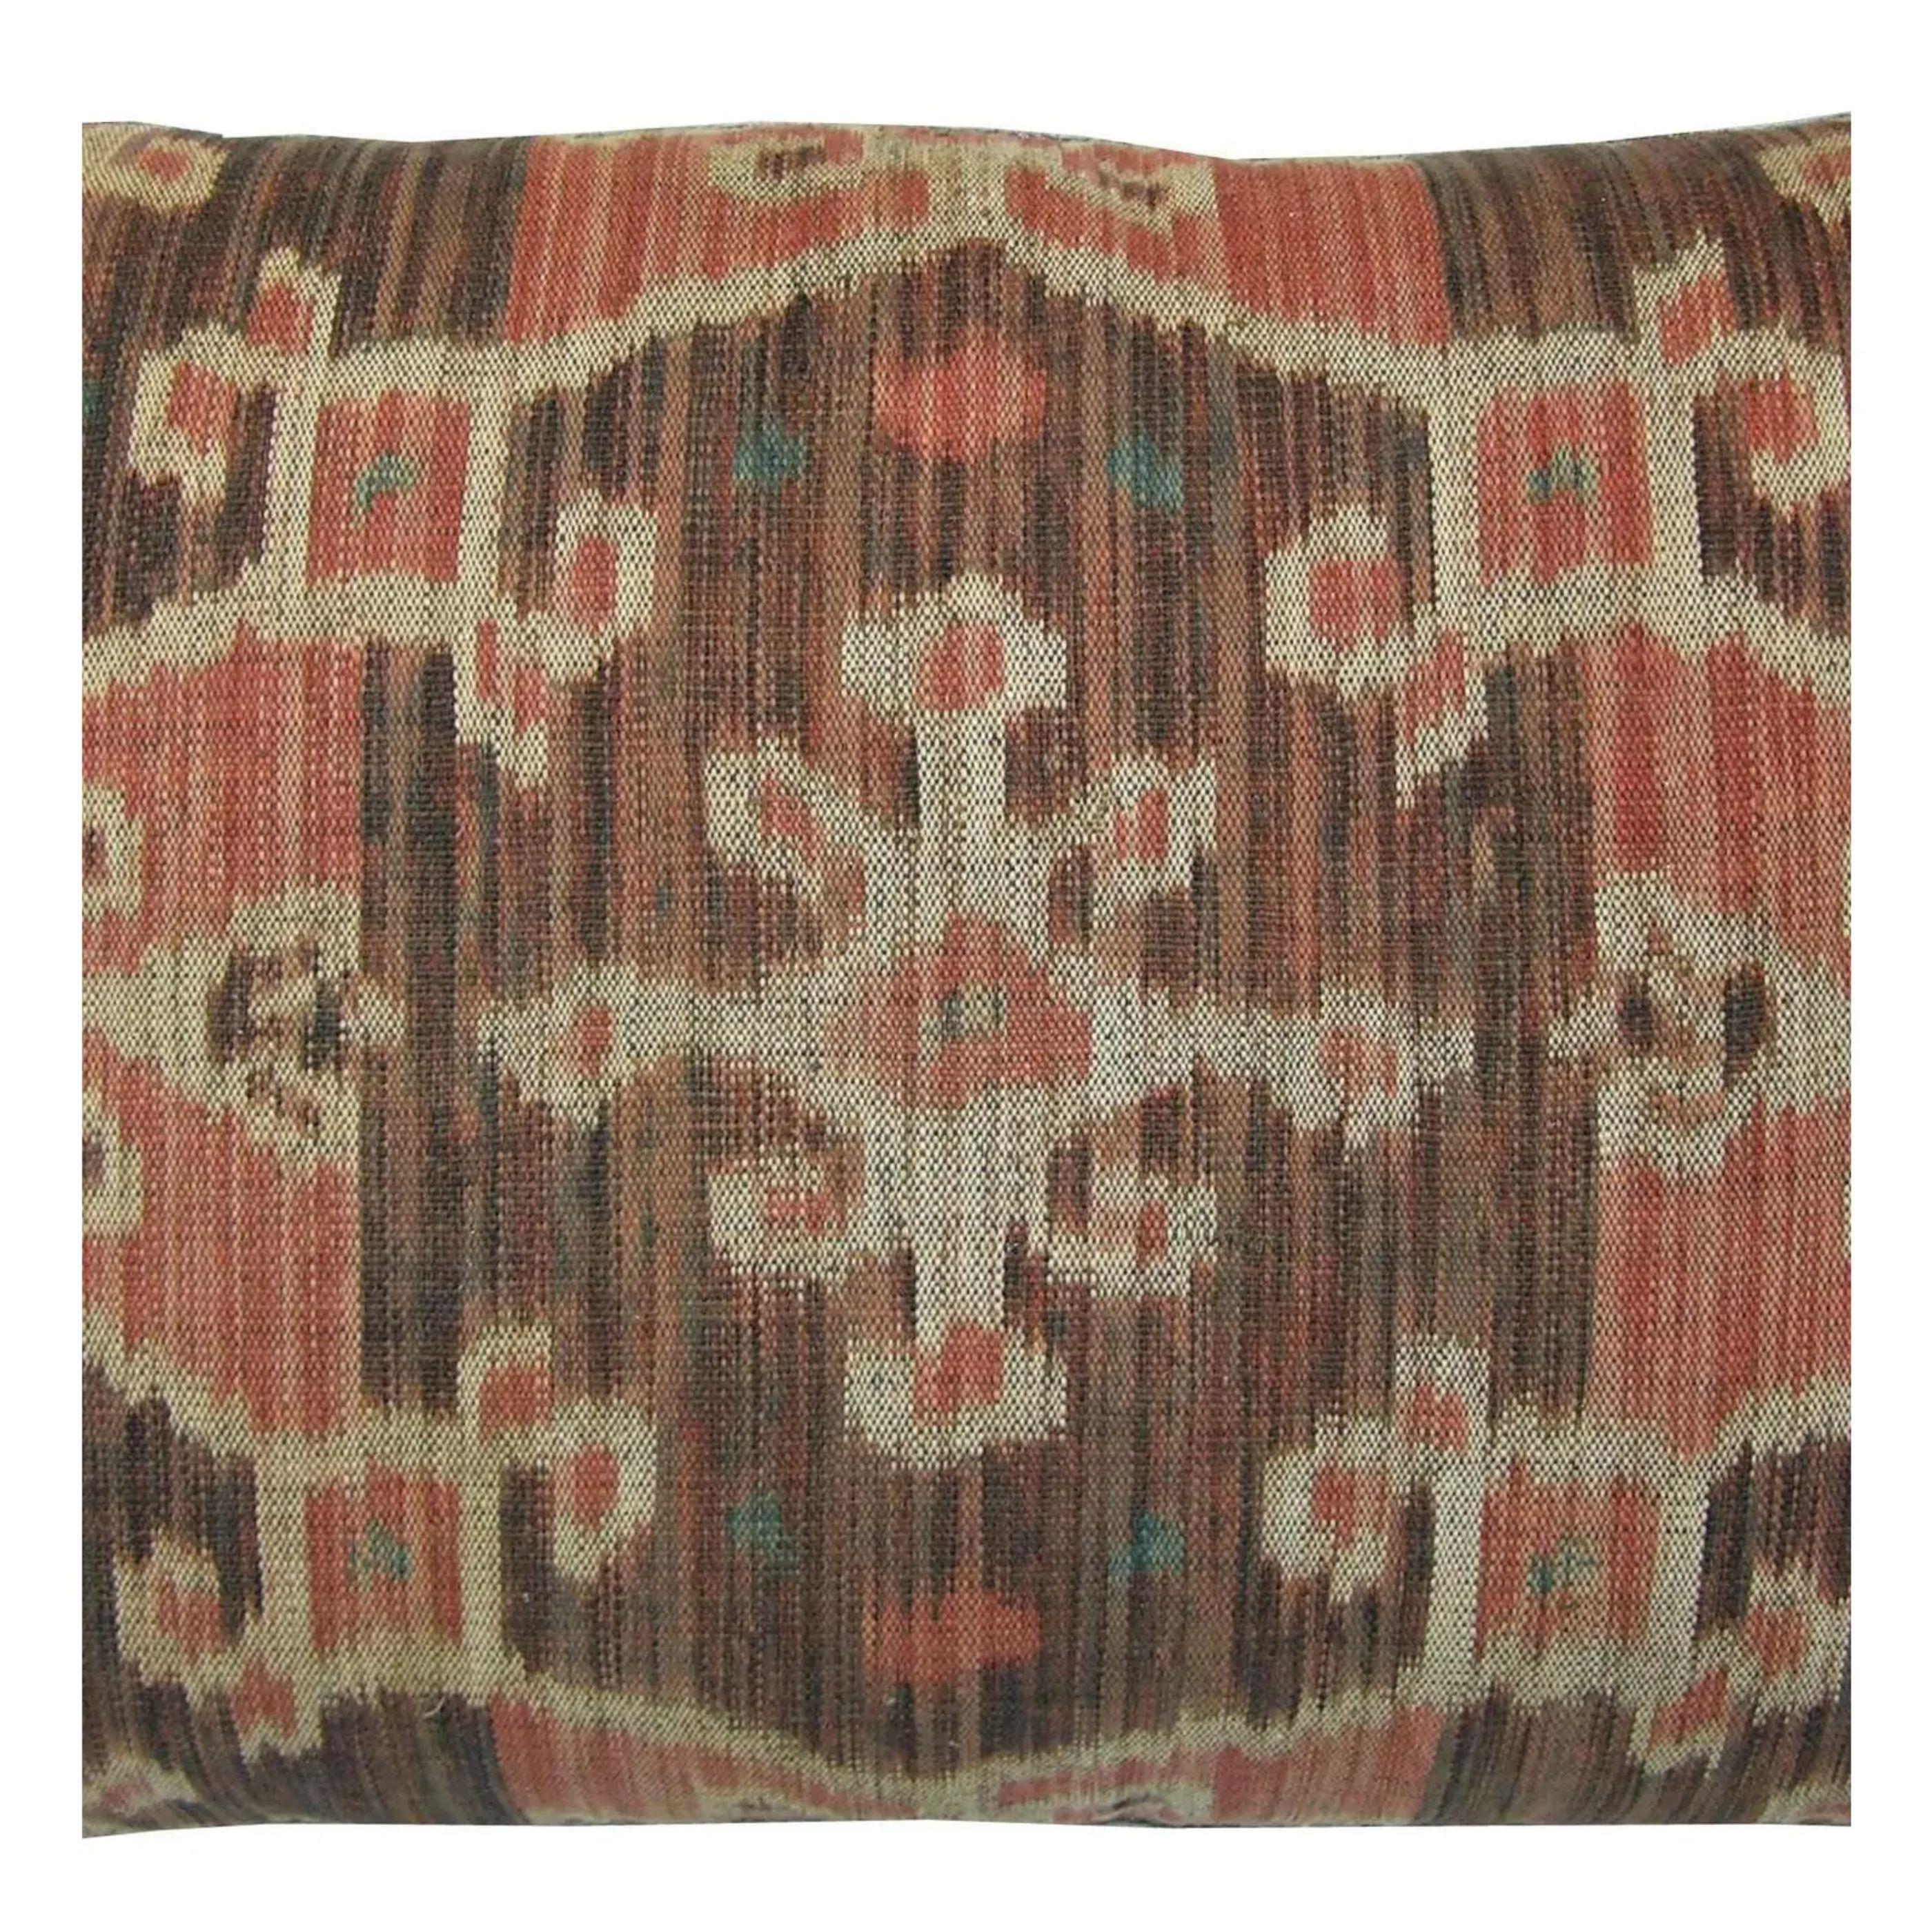 Indonesian 1850 Antique Ikat Pillow - 23 X 14 For Sale